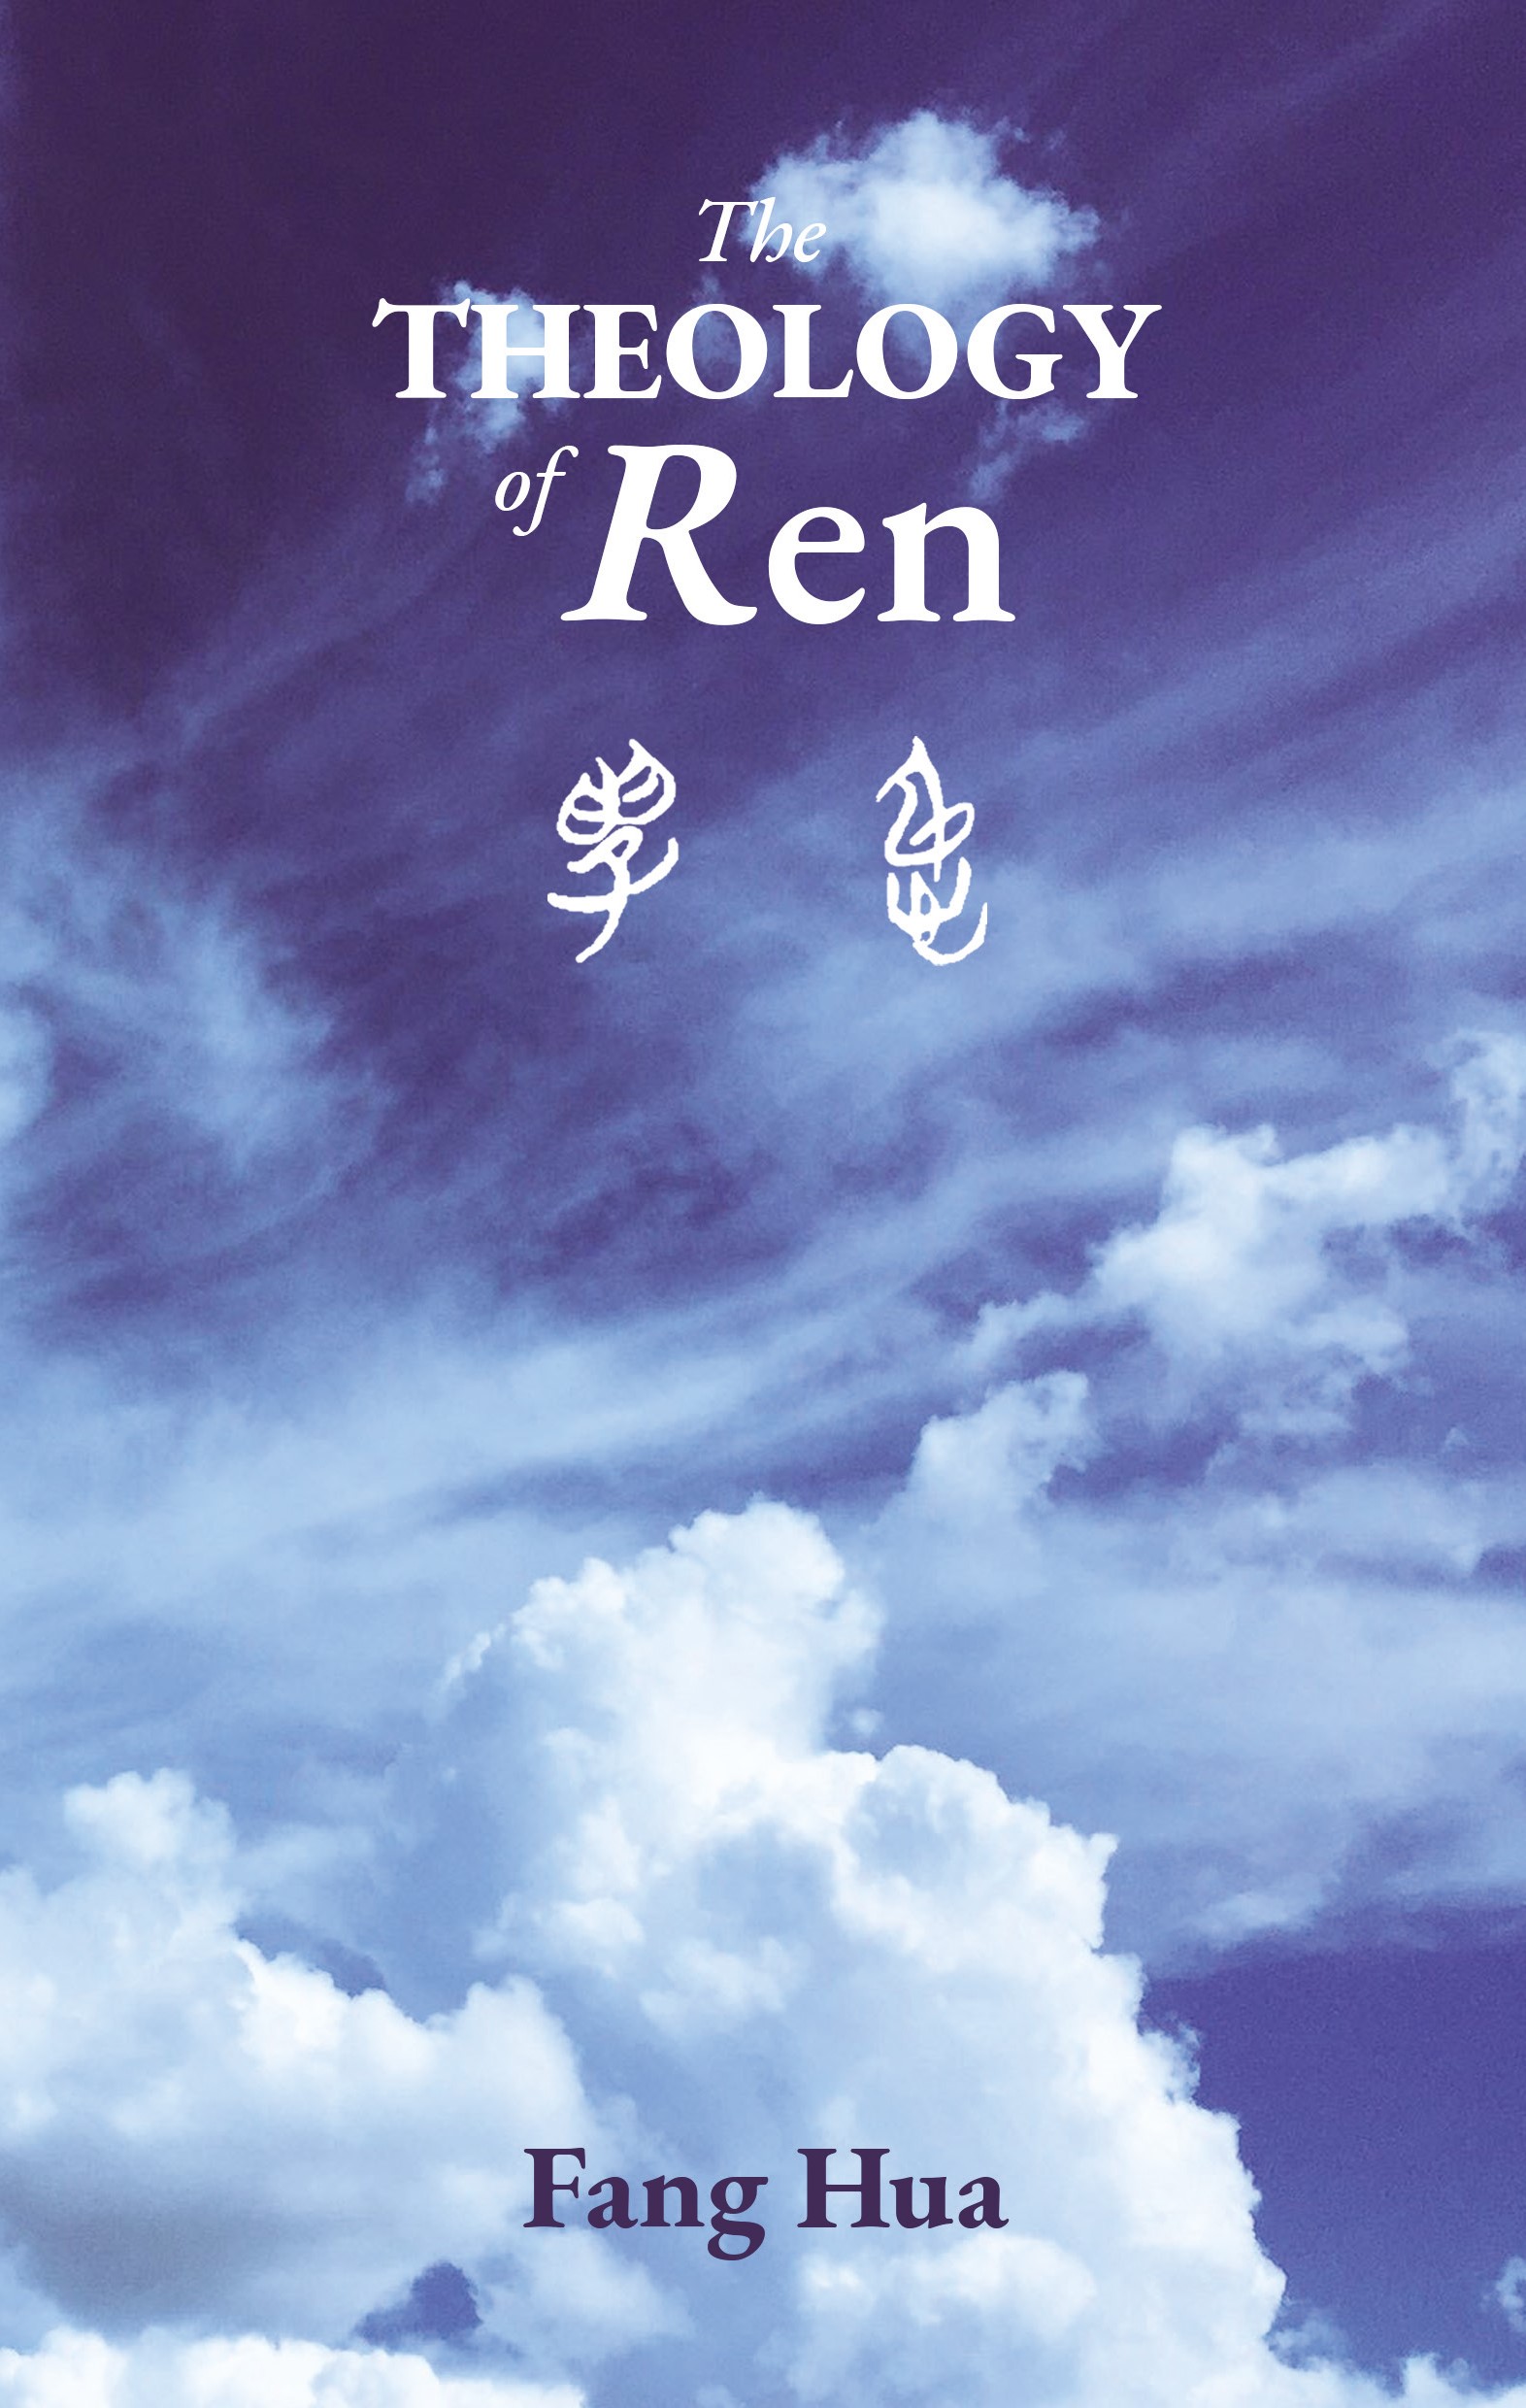 The Theology of Ren